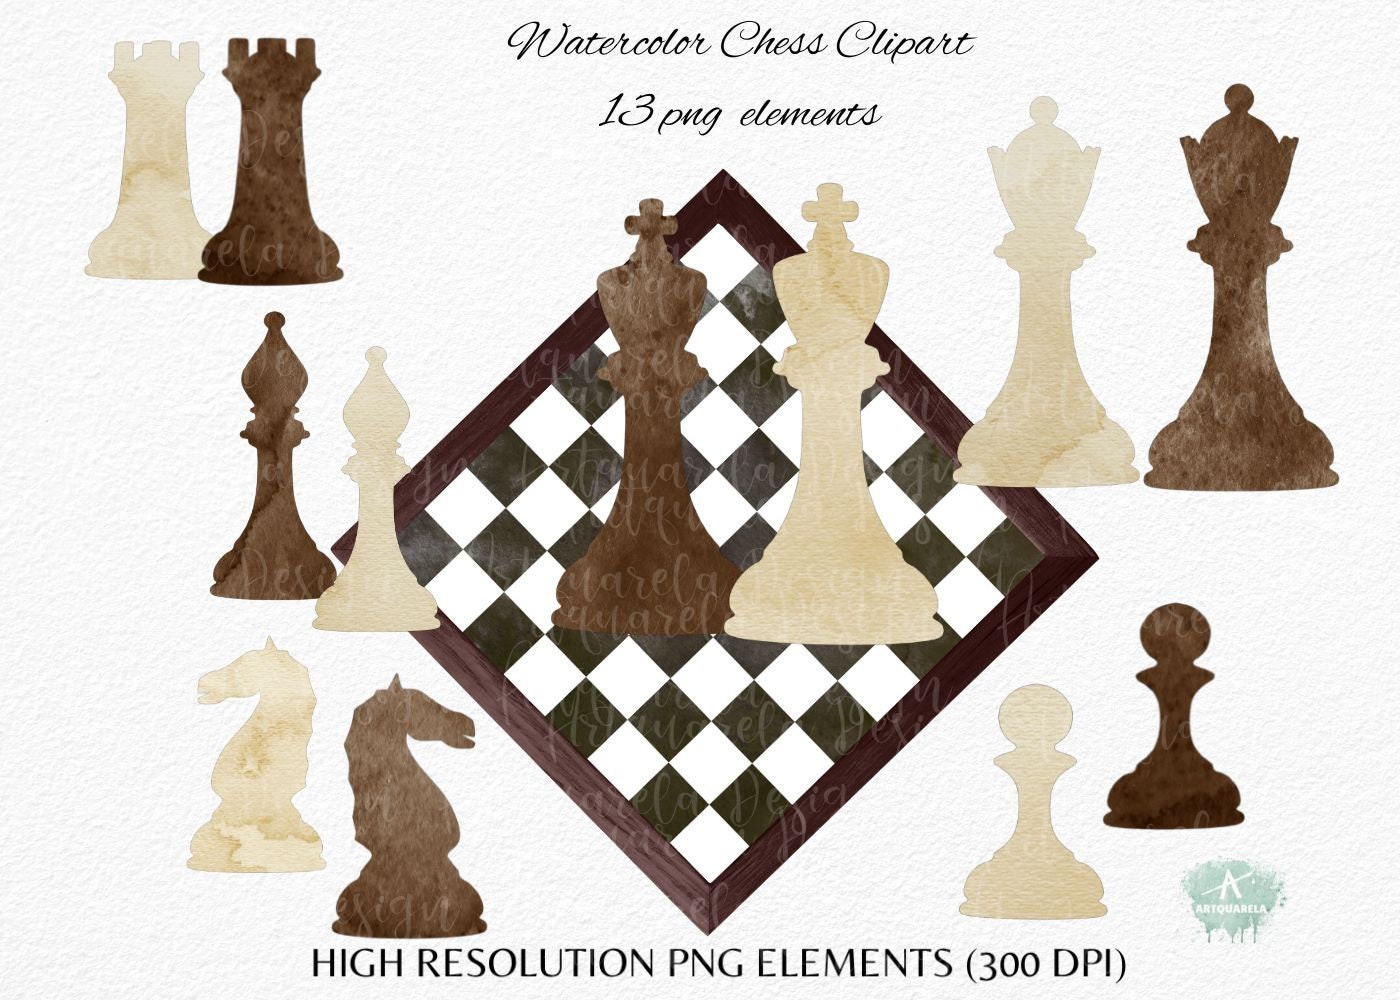 Chess Piece Chess Titans Portable Game Notation PNG, Clipart, Board Game,  Chess, Chessboard, Chess Piece, Chess